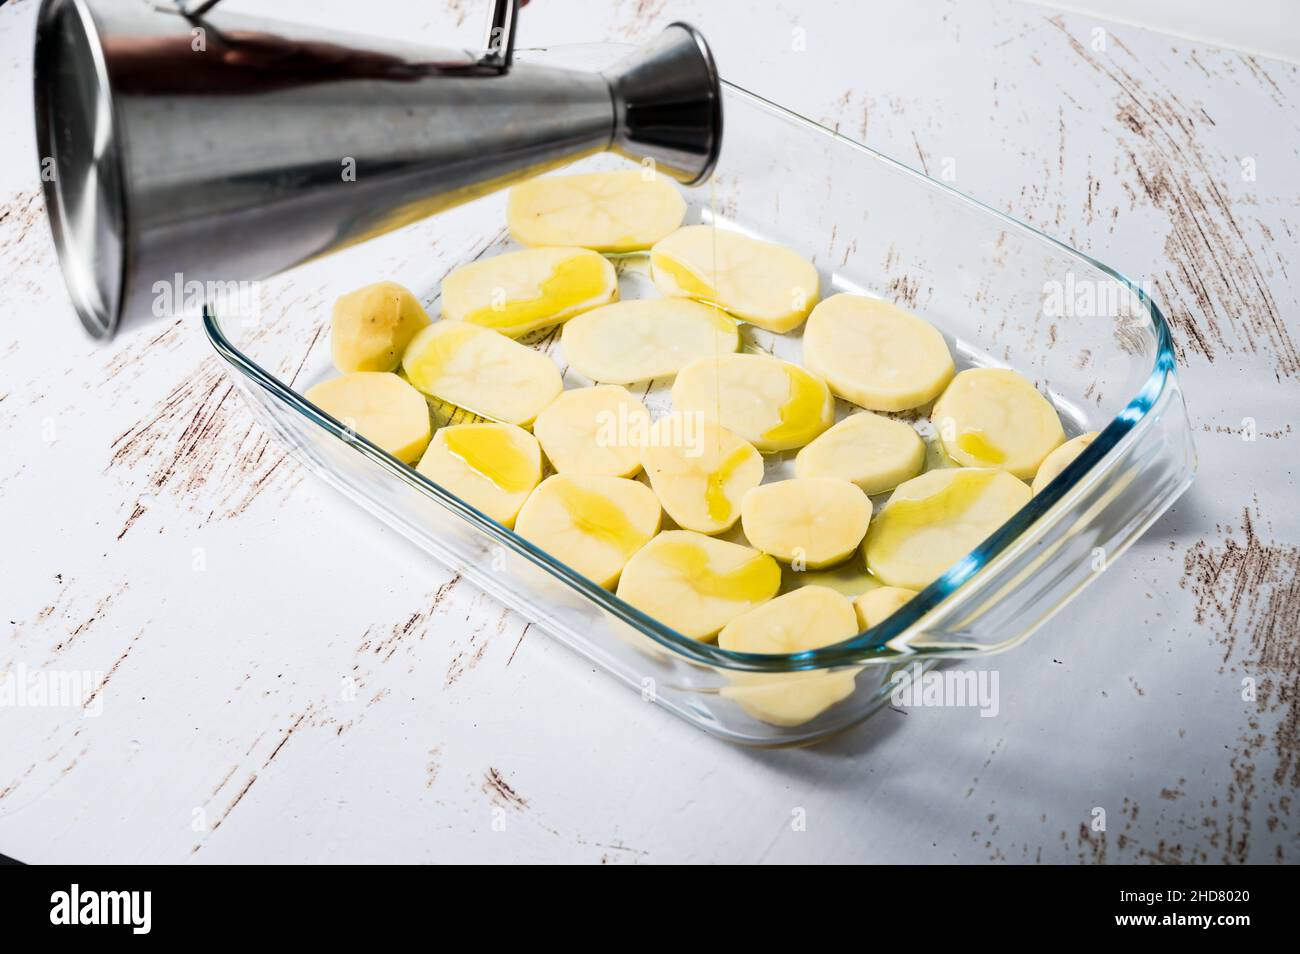 Unrecognizable person adding oil to a bed of potatoes in a glass baking dish to prepare a chicken cava in the oven. Stock Photo